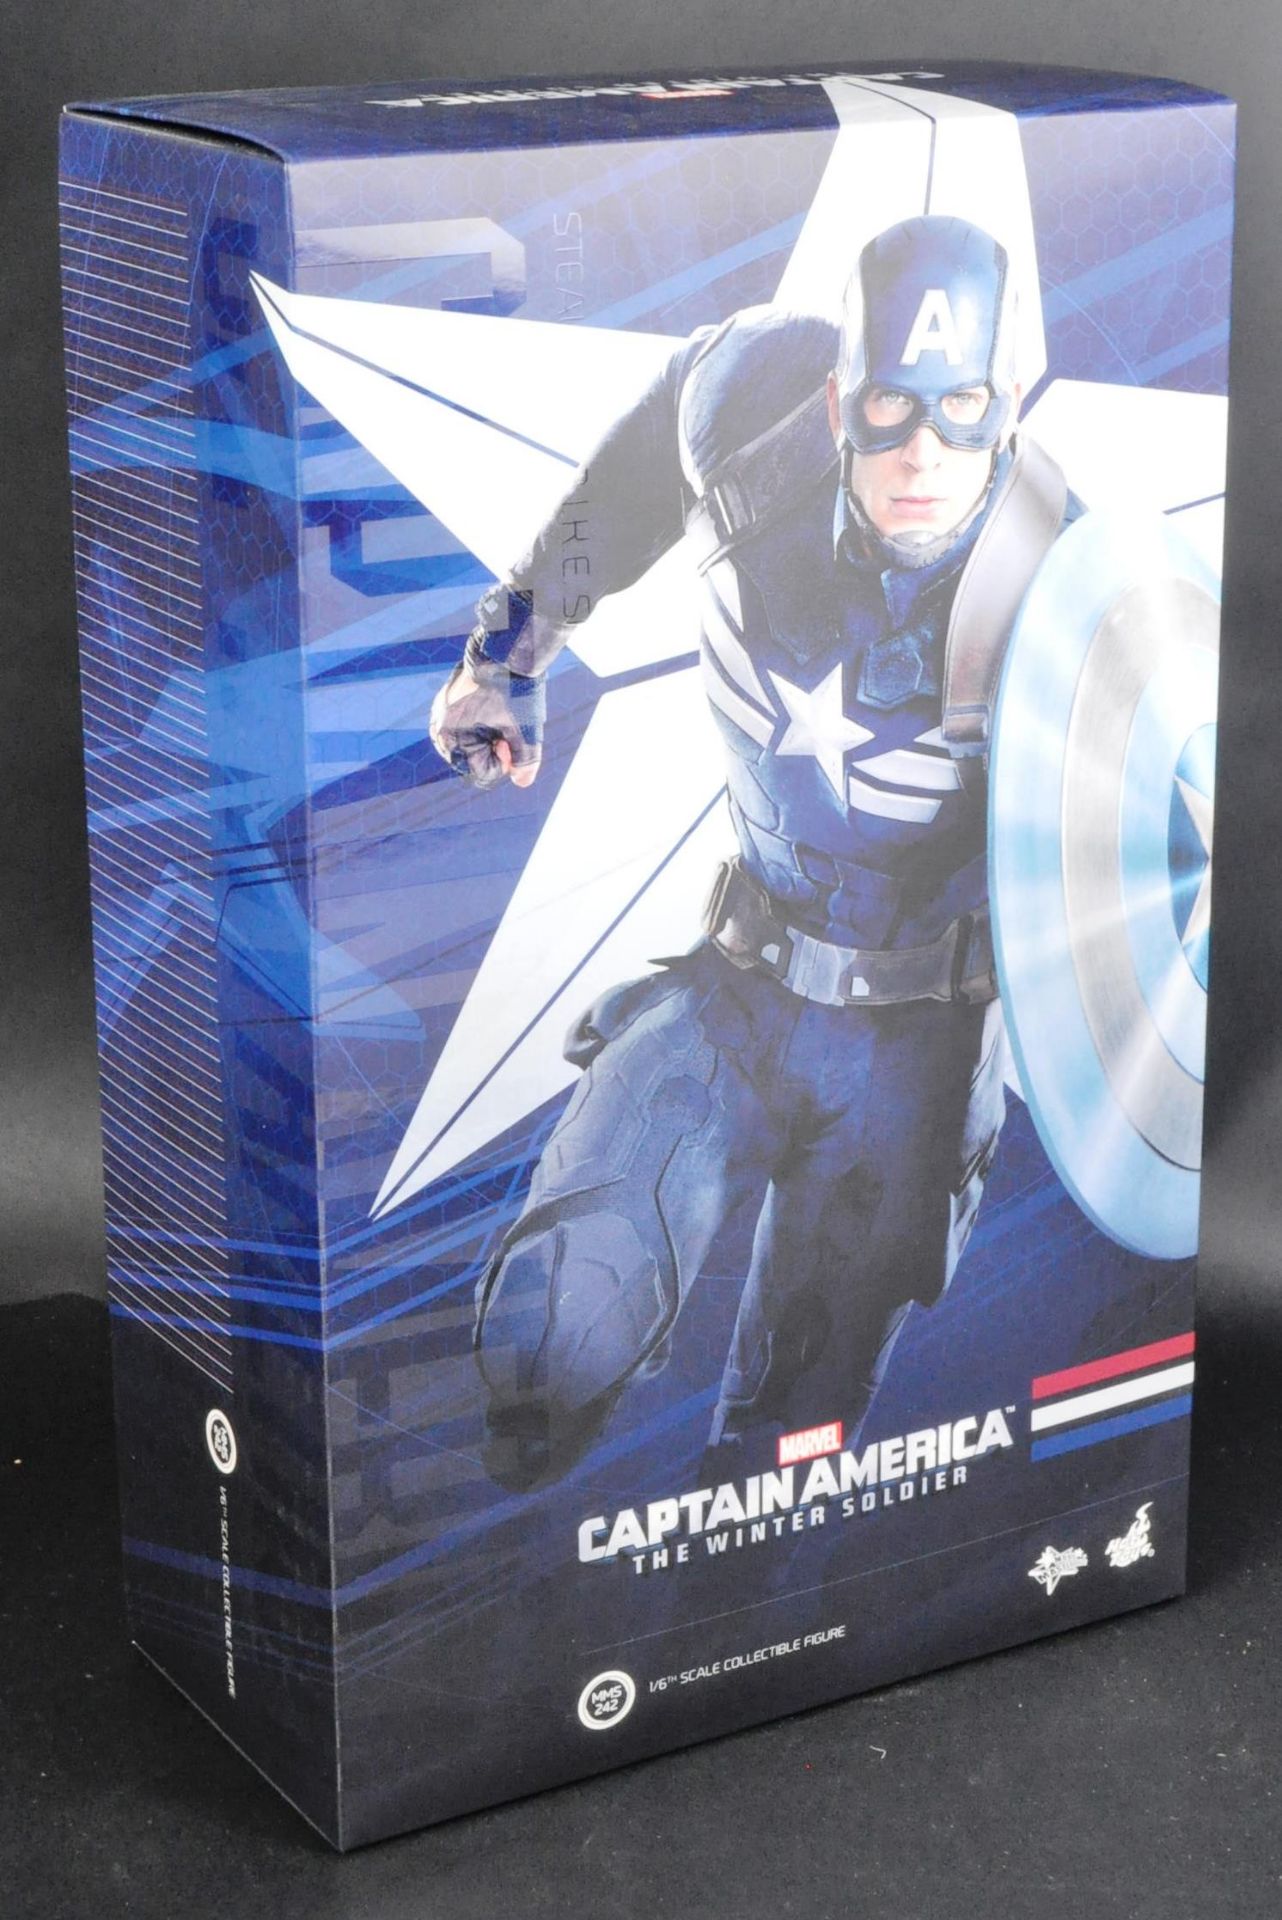 ORIGINAL HOT TOYS 1/6 SCALE CAPTAIN AMERICA MARVEL ACTION FIGURE - Image 4 of 5